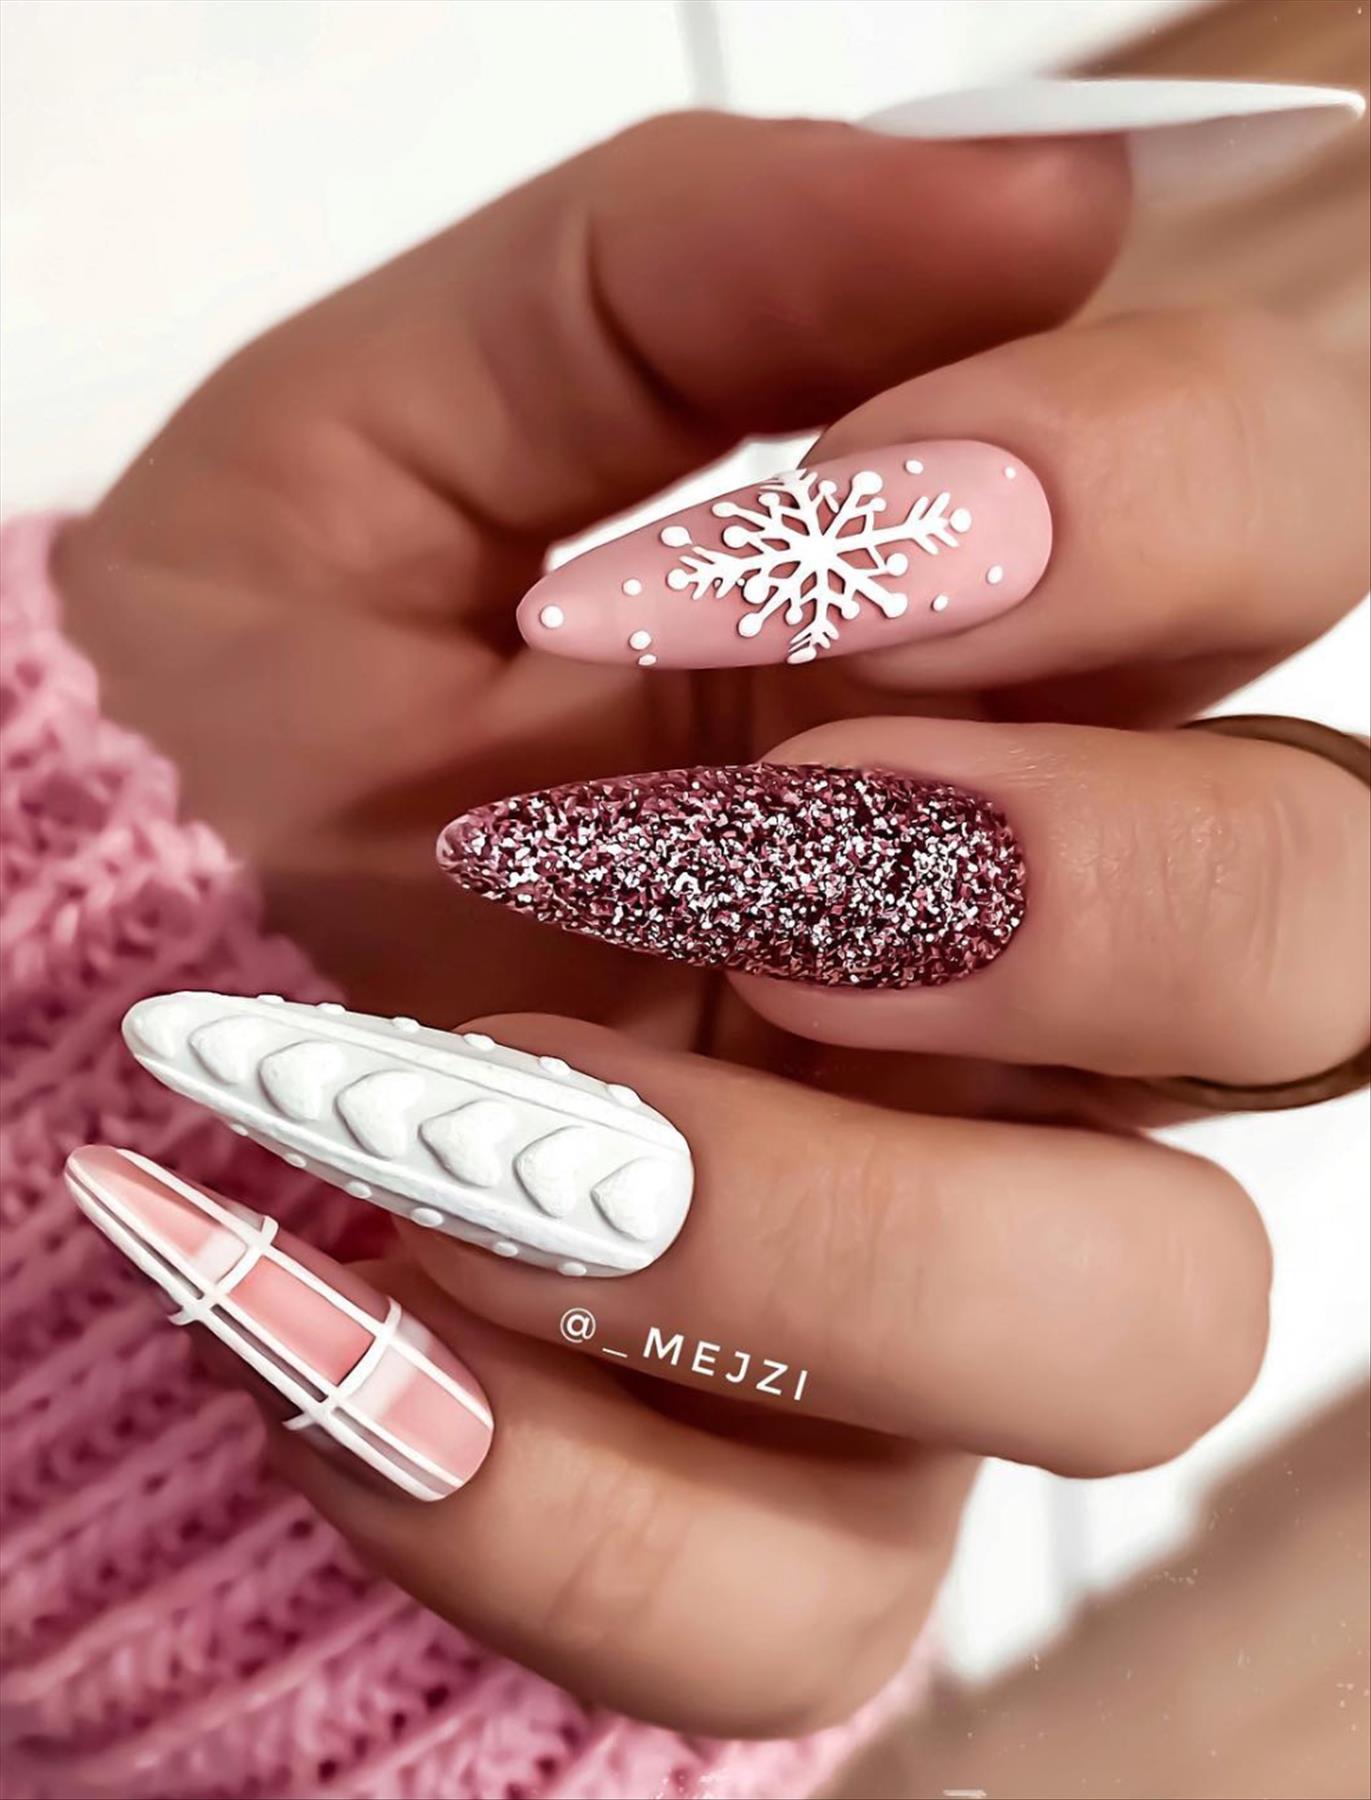 Merry Christmas nail designs to get inspired in 2022